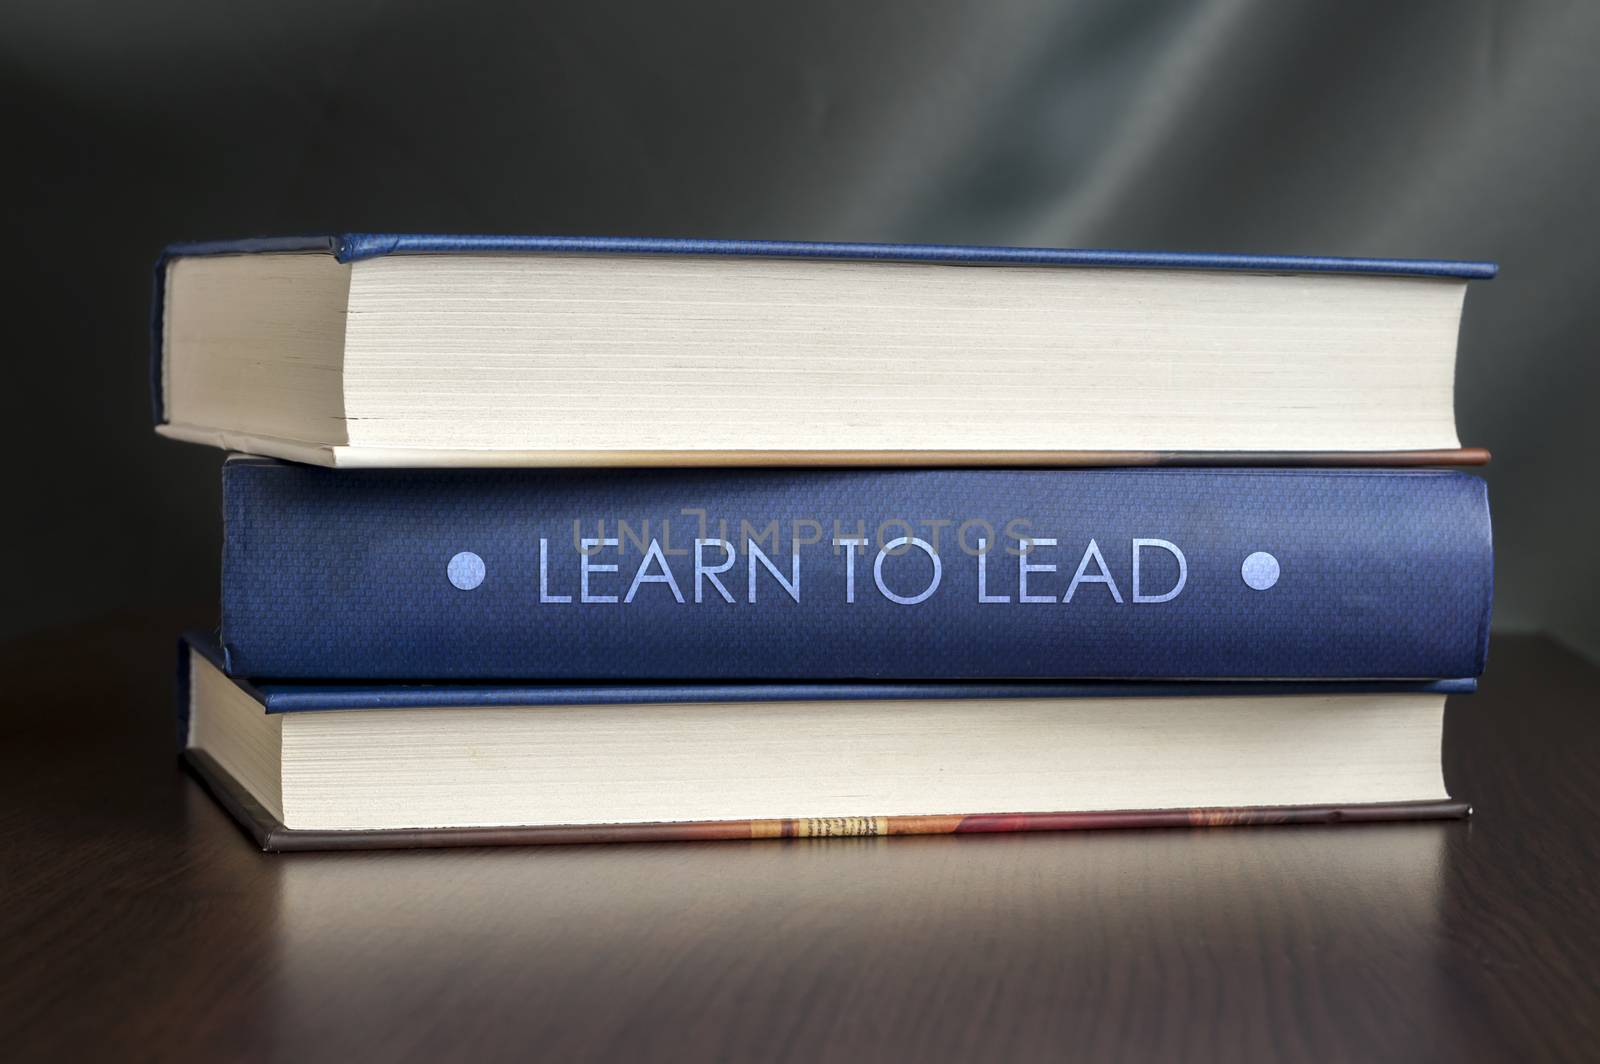 Books on a table and one with "Learn to lead" cover. Book concept.